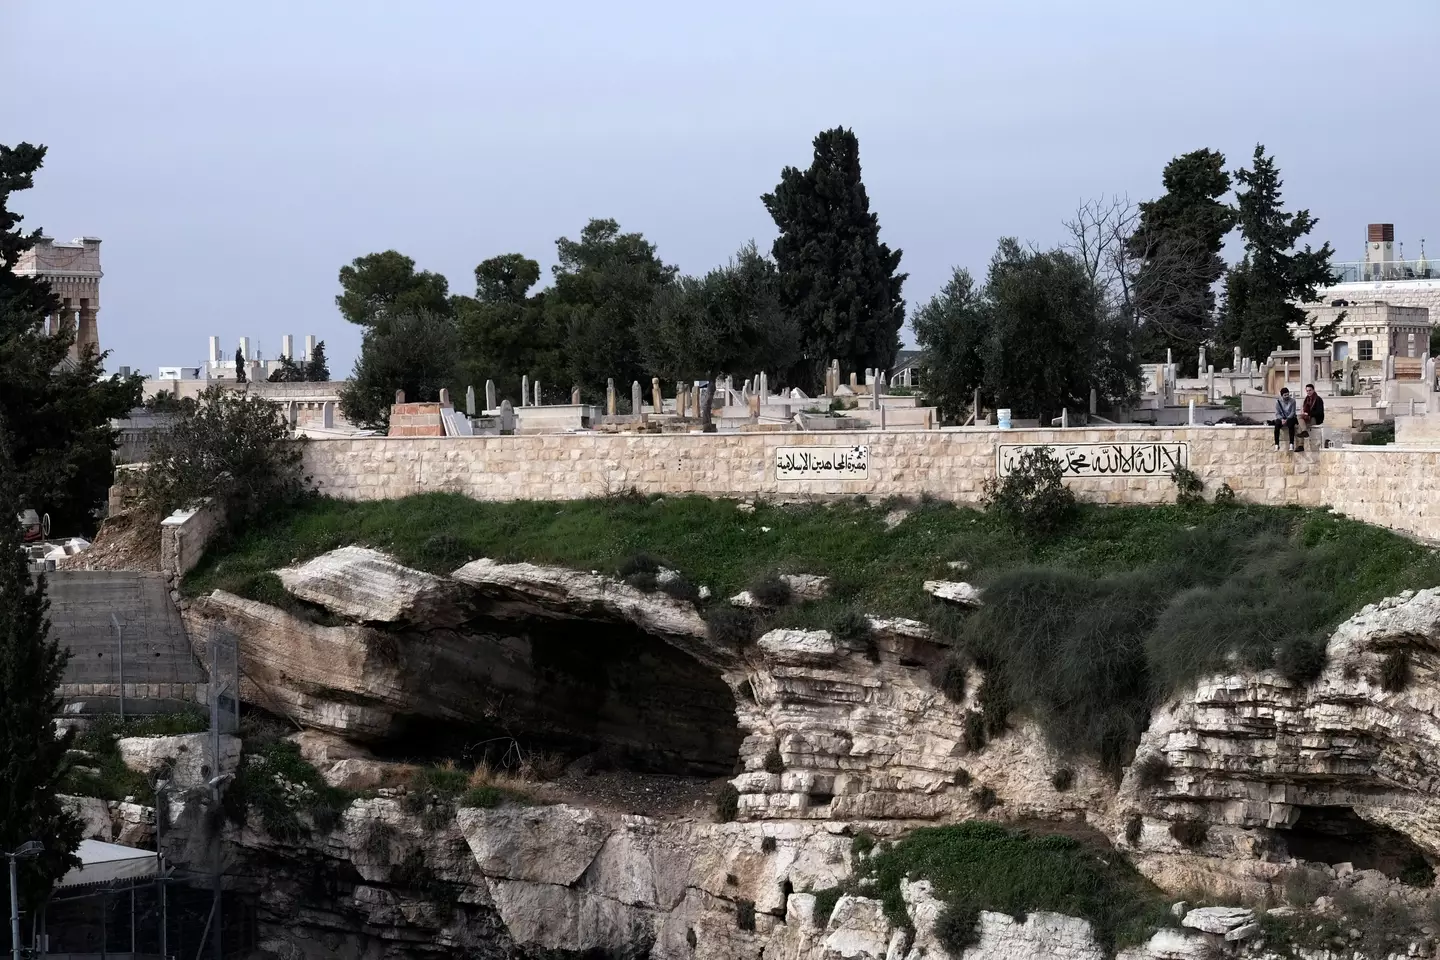 View of the Golgotha hill, a rocky escarpment resembling a skull, in Israel. Considered by some to be the site of the burial and resurrection of Jesus Christ.